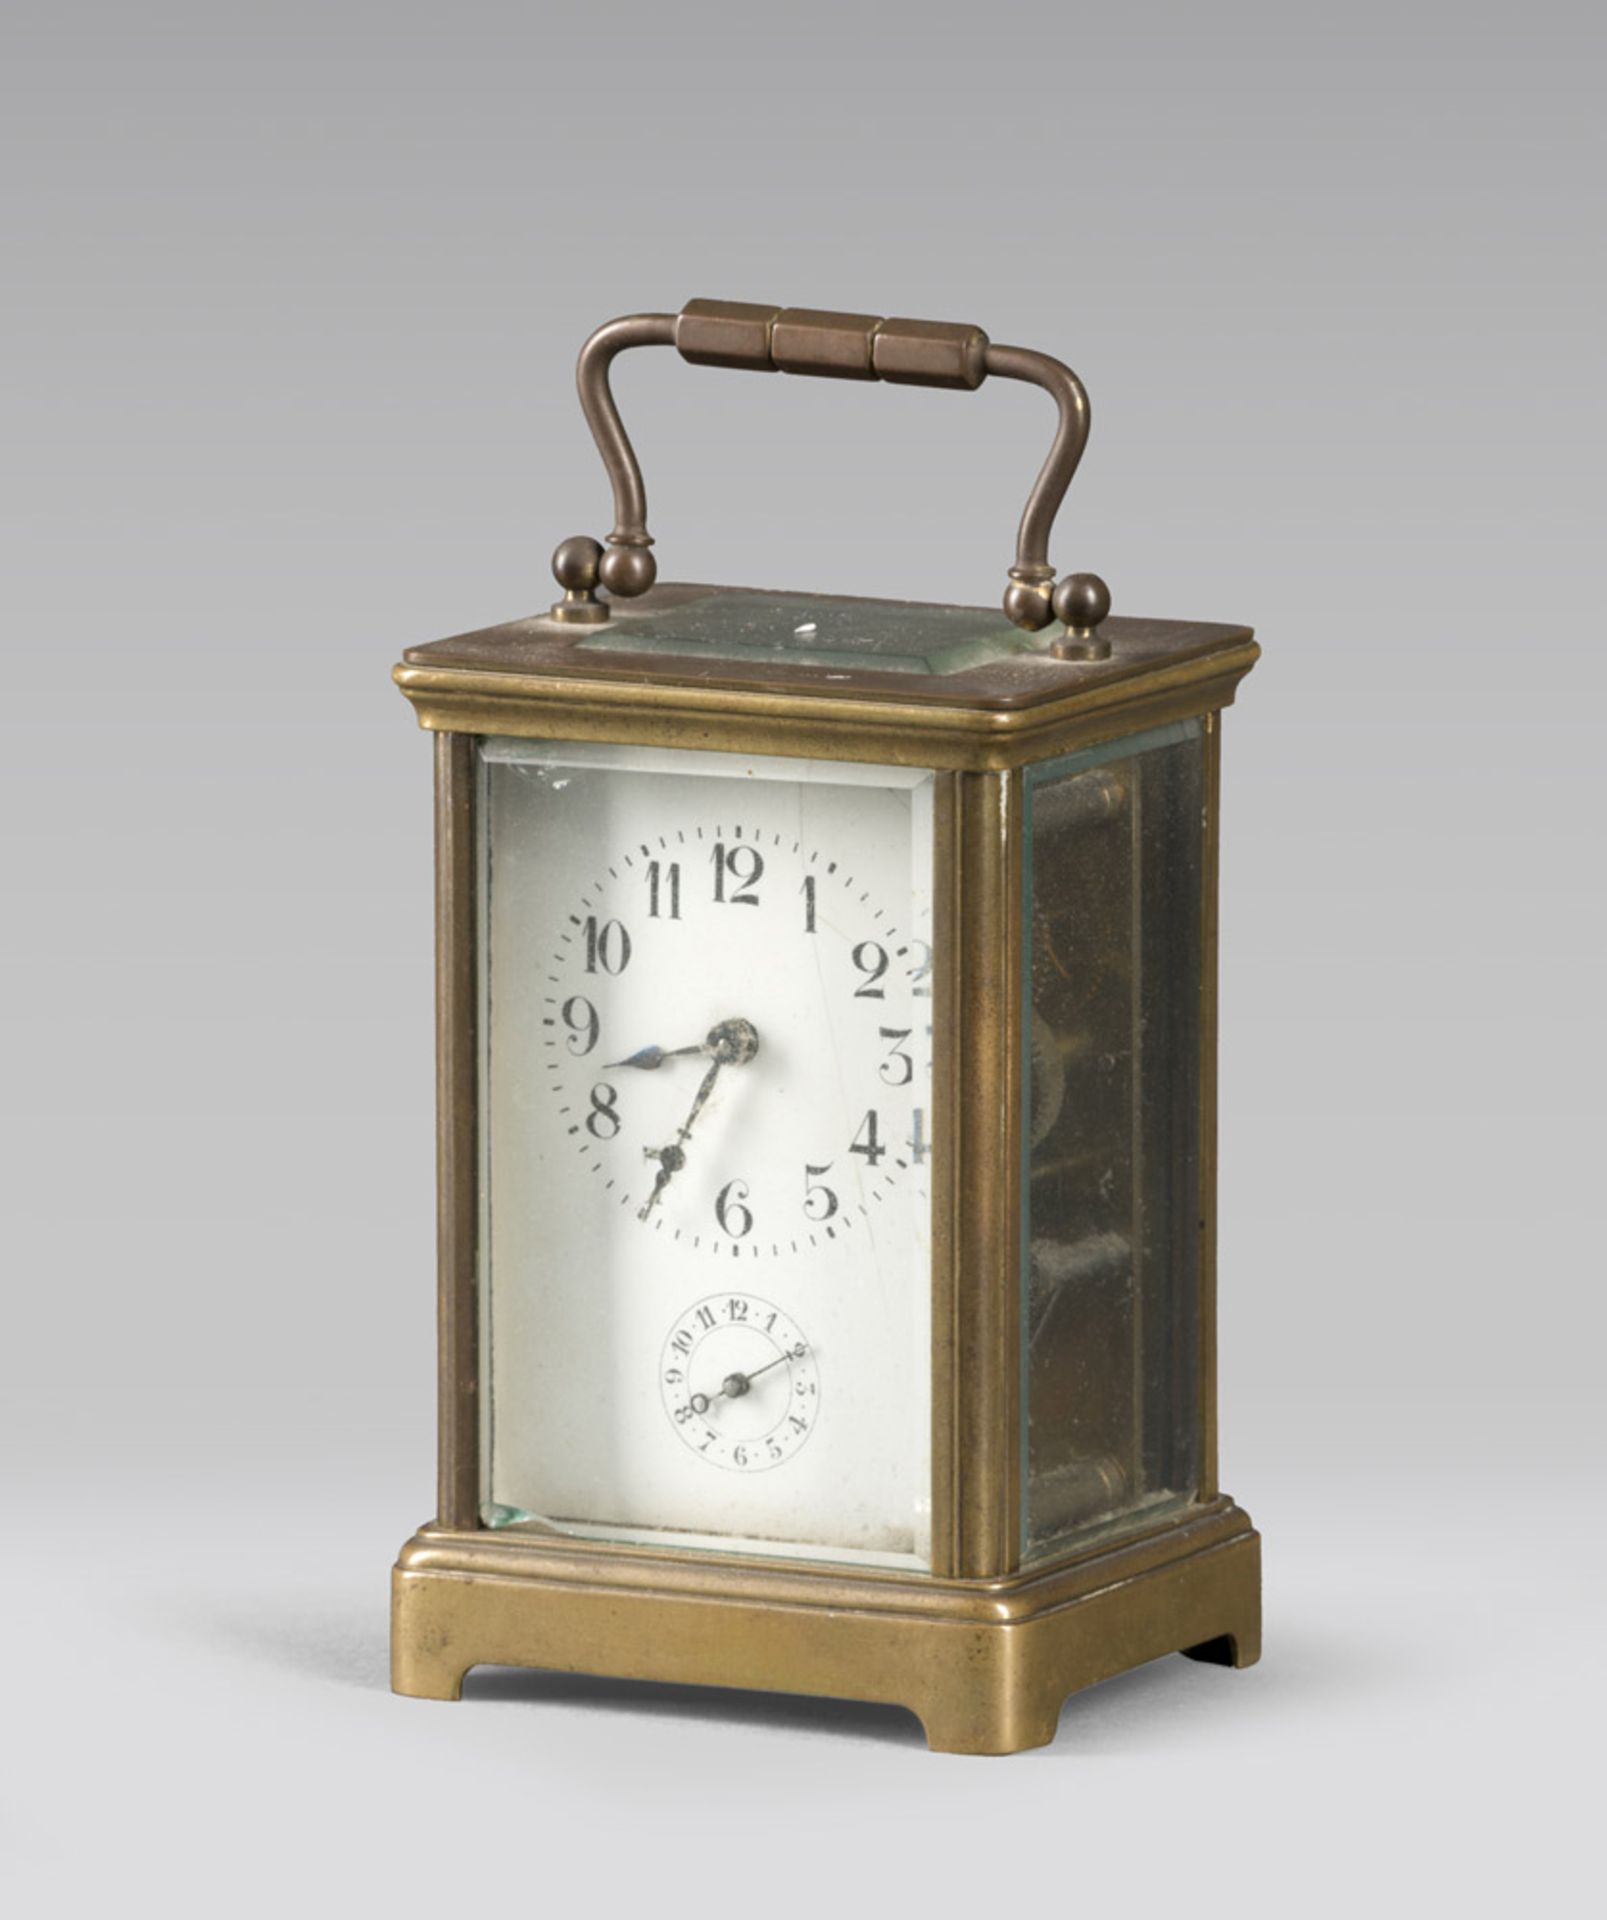 Table clock in brass with grinded glasses, early 20th century.